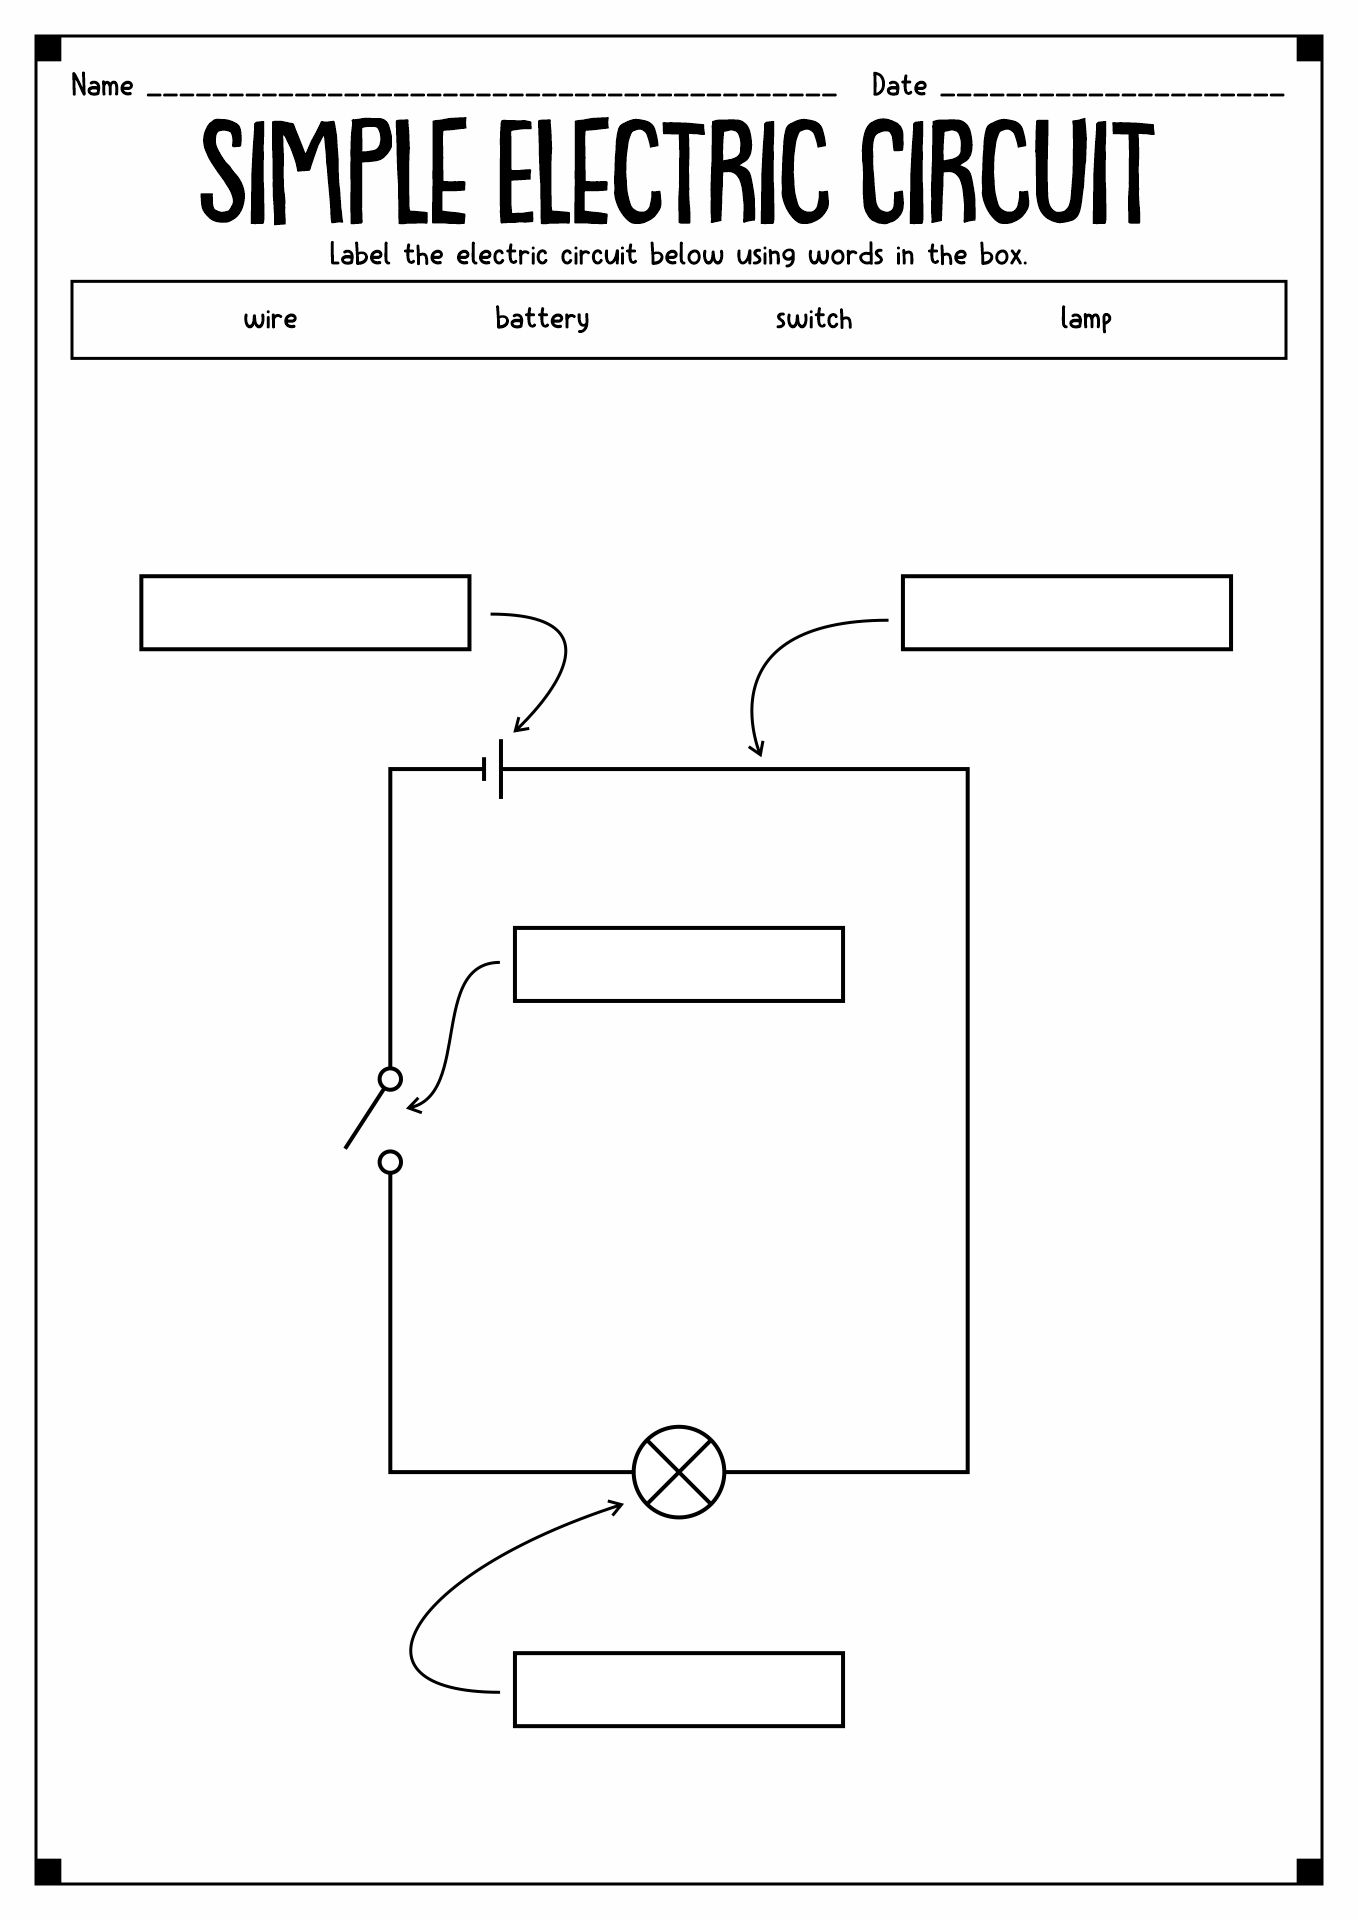 13 Best Images of Simple Circuit Worksheets 4th Grade - Electricity